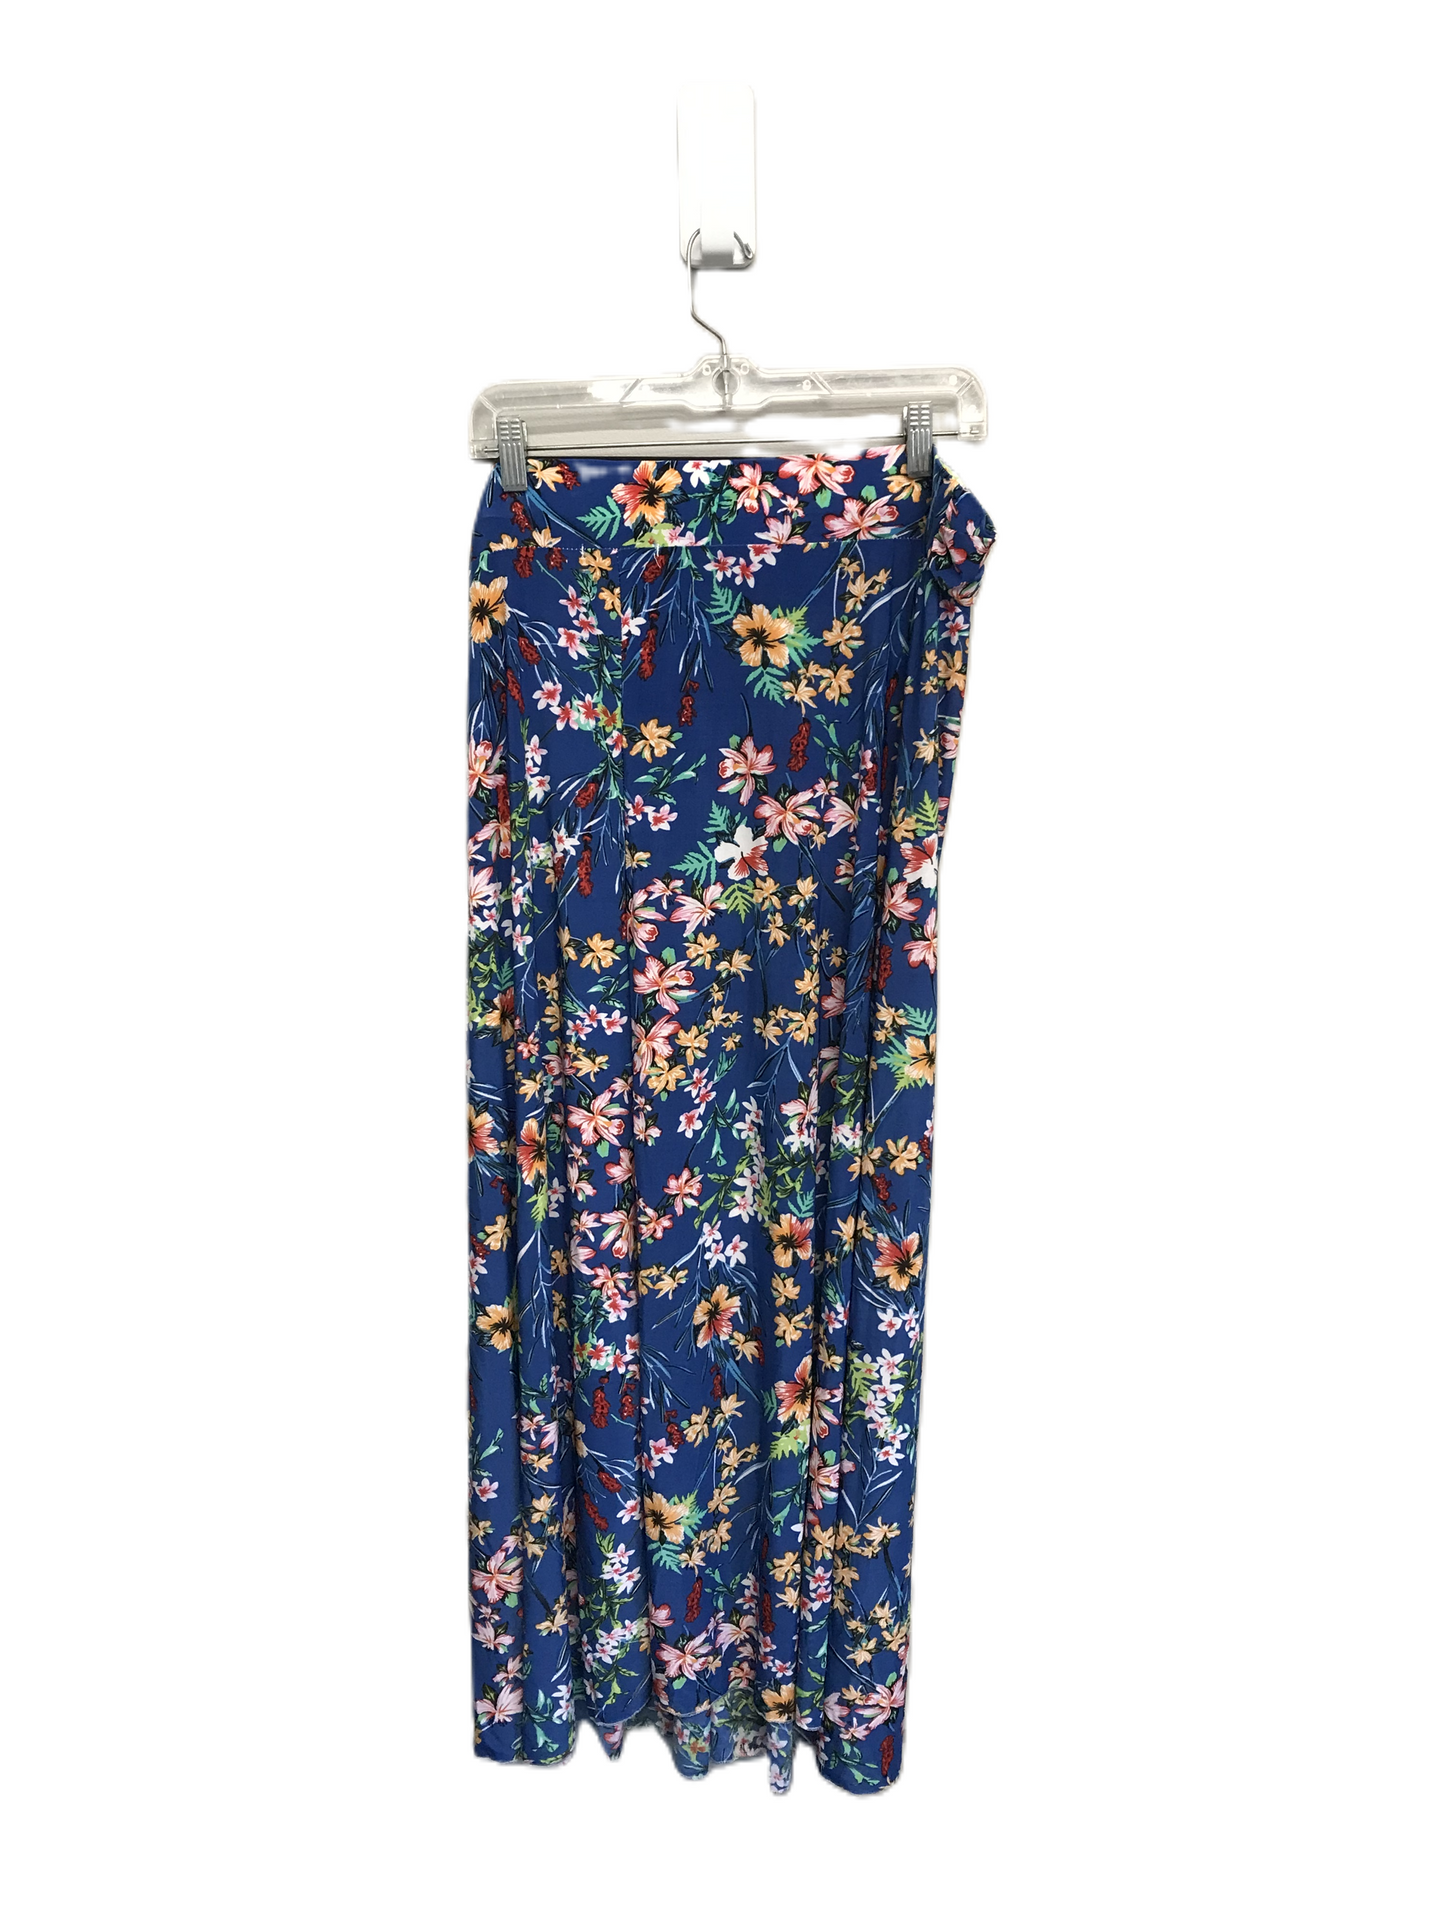 Floral Print Skirt Maxi By Emily Stacy Size: 3x